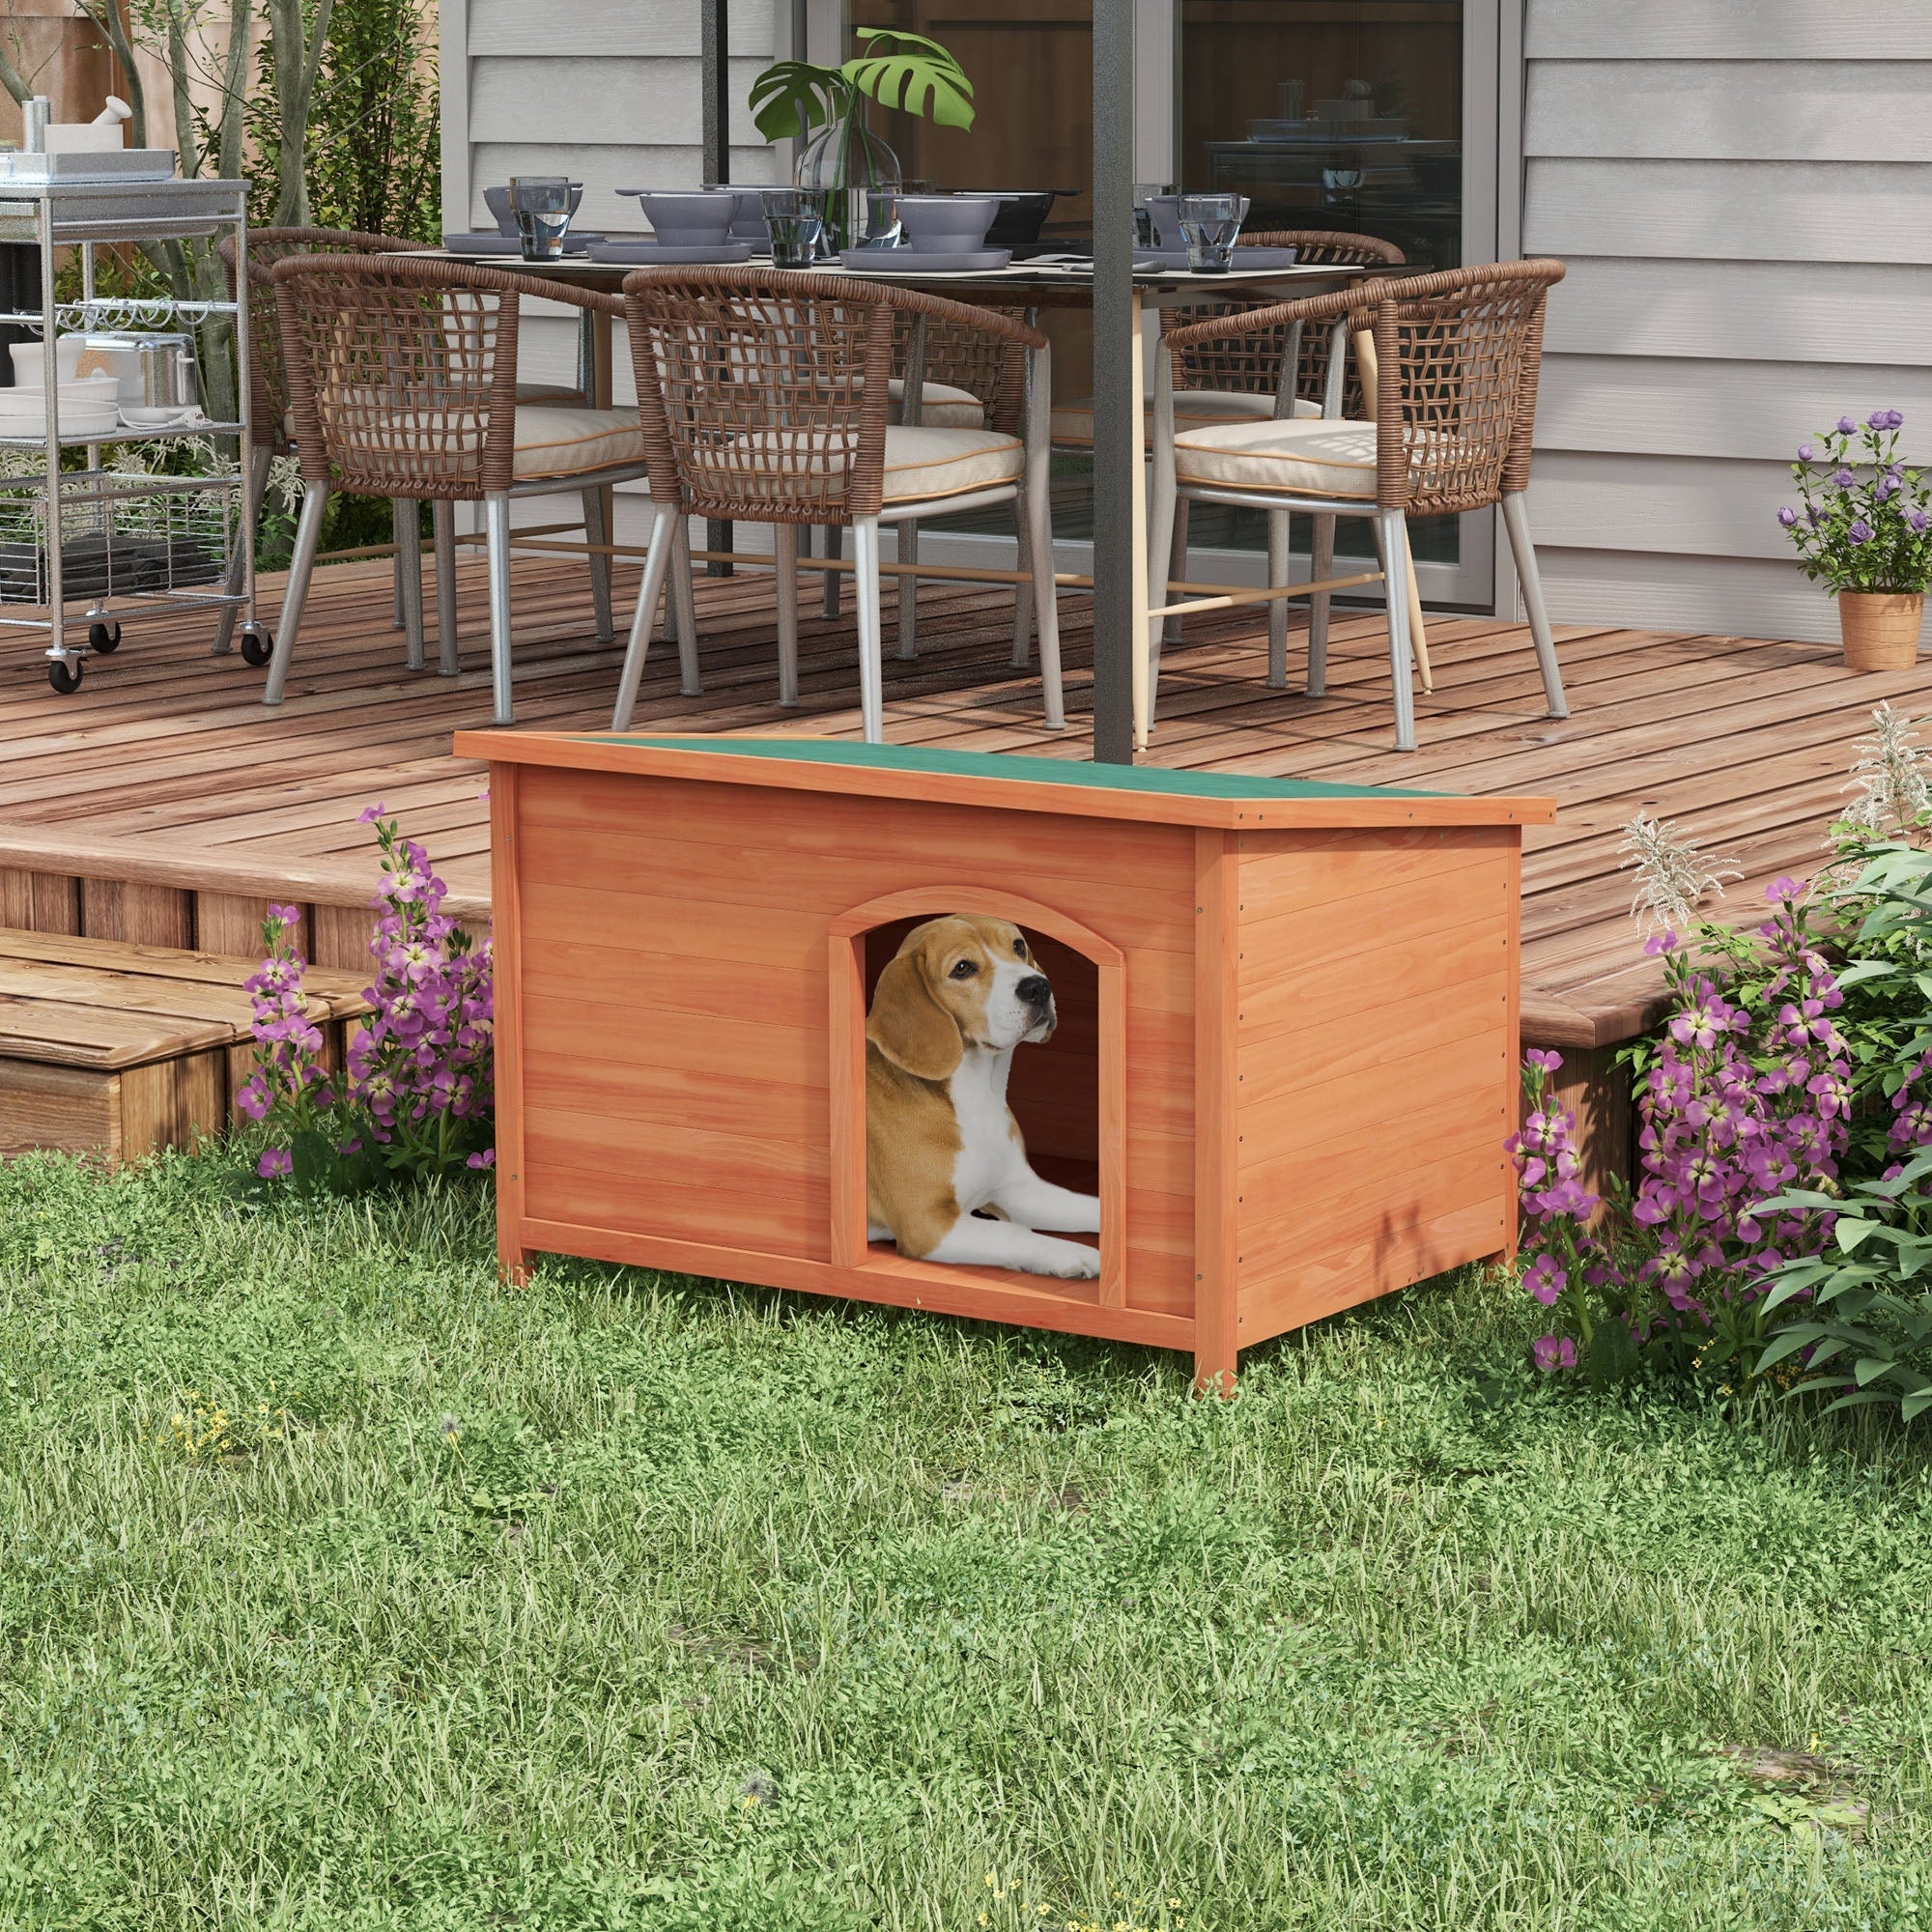 Wooden Dog Kennel, Outdoor Pet House, with Removable Floor, Openable Roof, Water-Resistant Paint - Natural Wood Tone-1